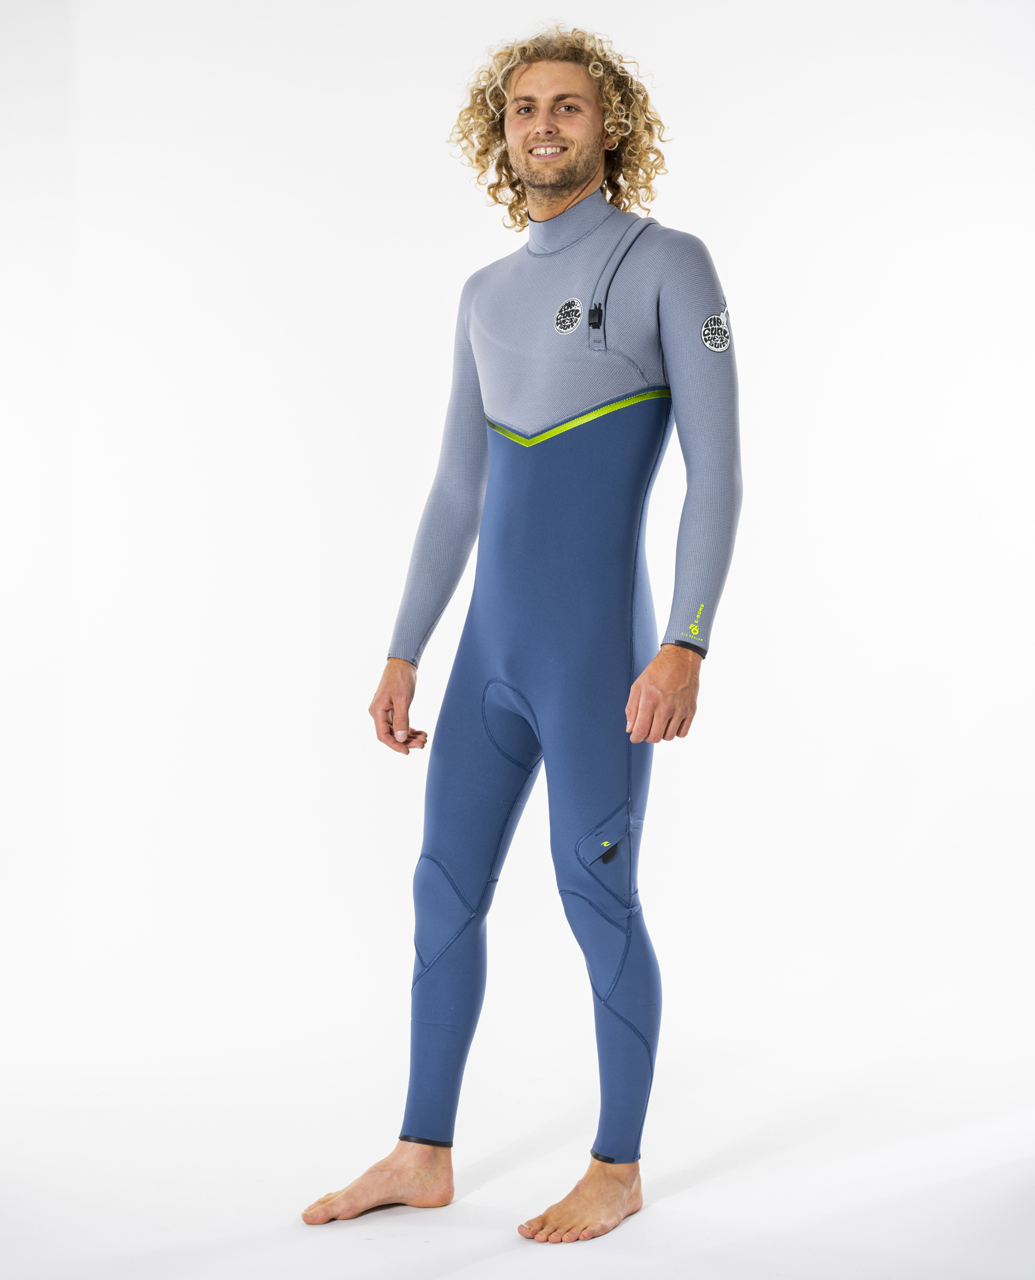 Rip Curl S/S 22 Wetsuits Preview